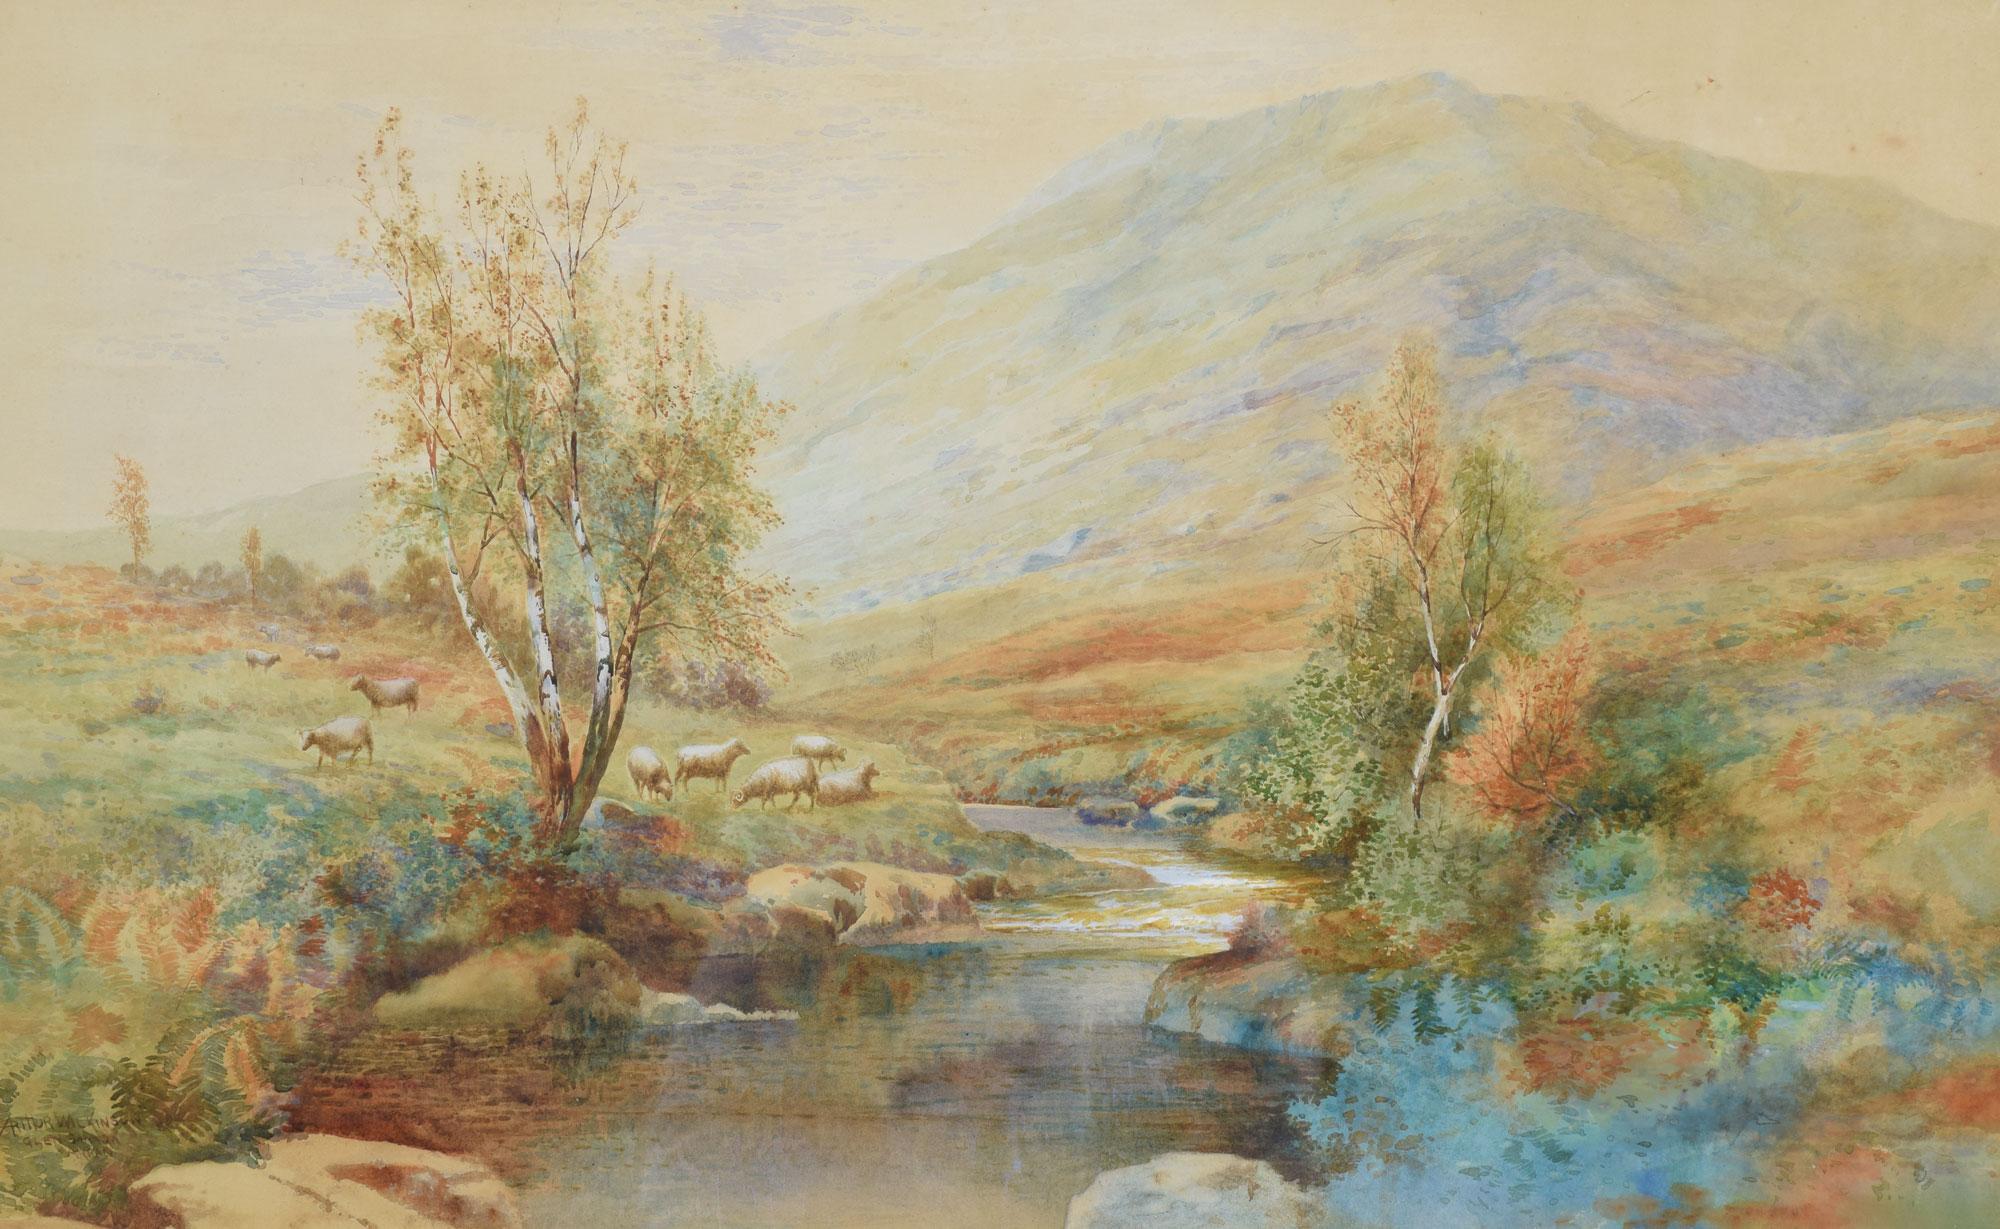 Large early 20th century landscape watercolor inscribed Glen Gannon Arran enclosed in a painted frame.
Dimensions
Height 27 inches
Length 38 inches
width 2 inches.